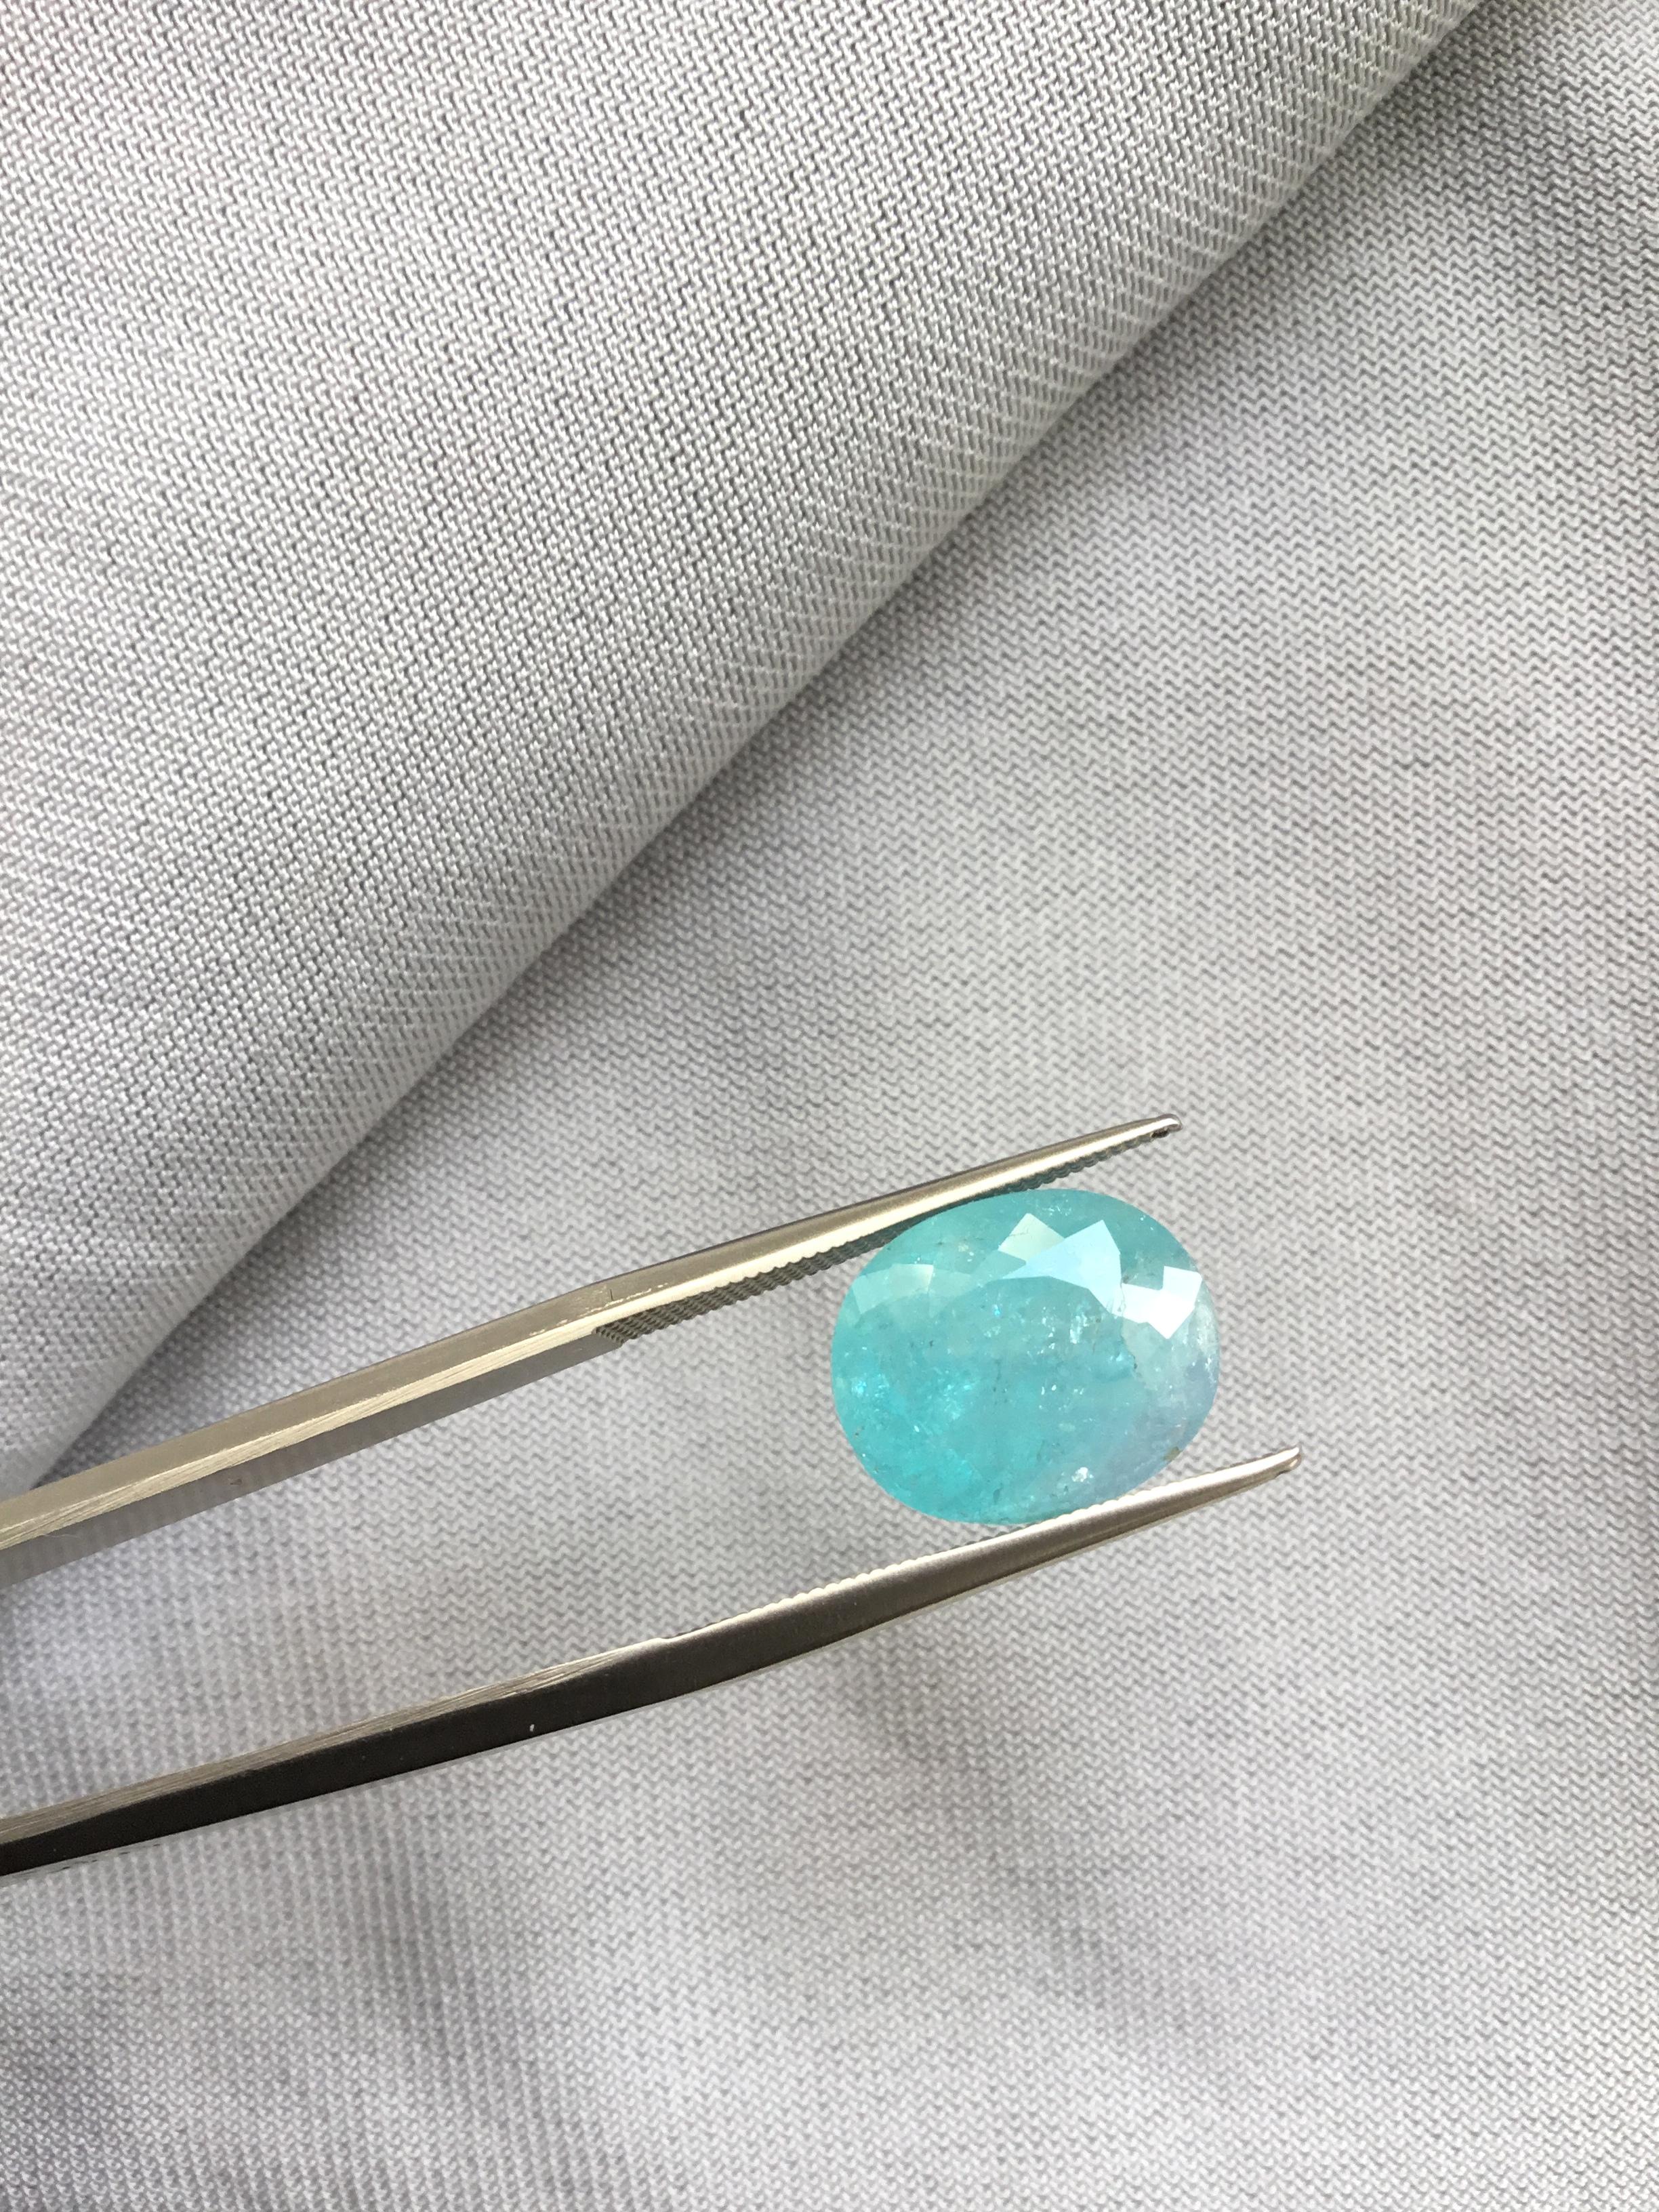 Exceptional 6.35 Carats Paraiba Tourmaline Oval Cut Stone for Fine Jewelry